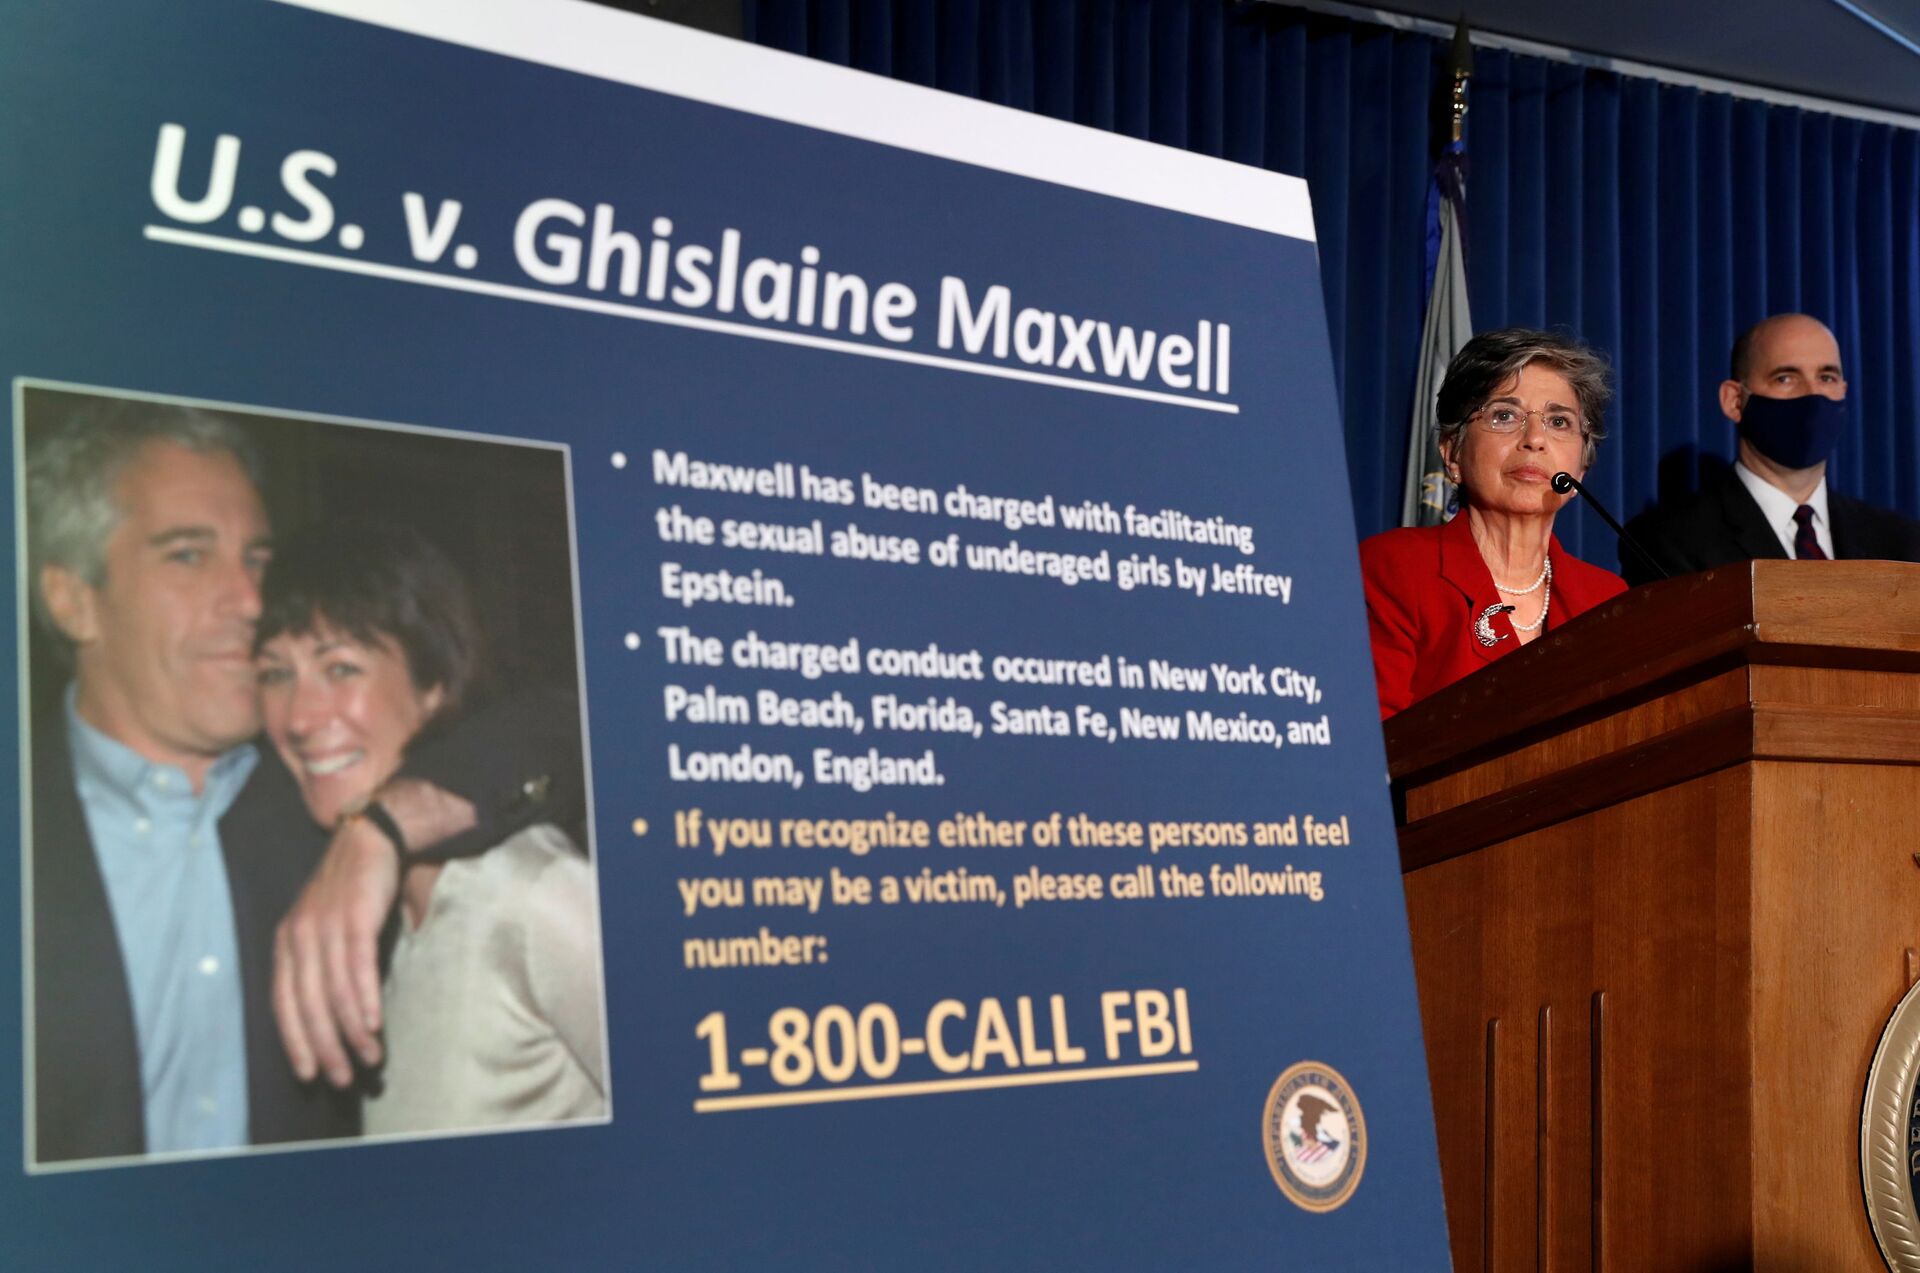 FILE PHOTO: Audrey Strauss, acting U.S. attorney for the Southern District of New York, speaks alongside William F. Sweeney Jr., assistant director-in-charge of the New York Office, at a news conference announcing charges against Ghislaine Maxwell for her alleged role in the sexual exploitation and abuse of minor girls by Jeffrey Epstein in New York City, New York, U.S., July 2, 2020 - Sputnik International, 1920, 07.09.2021